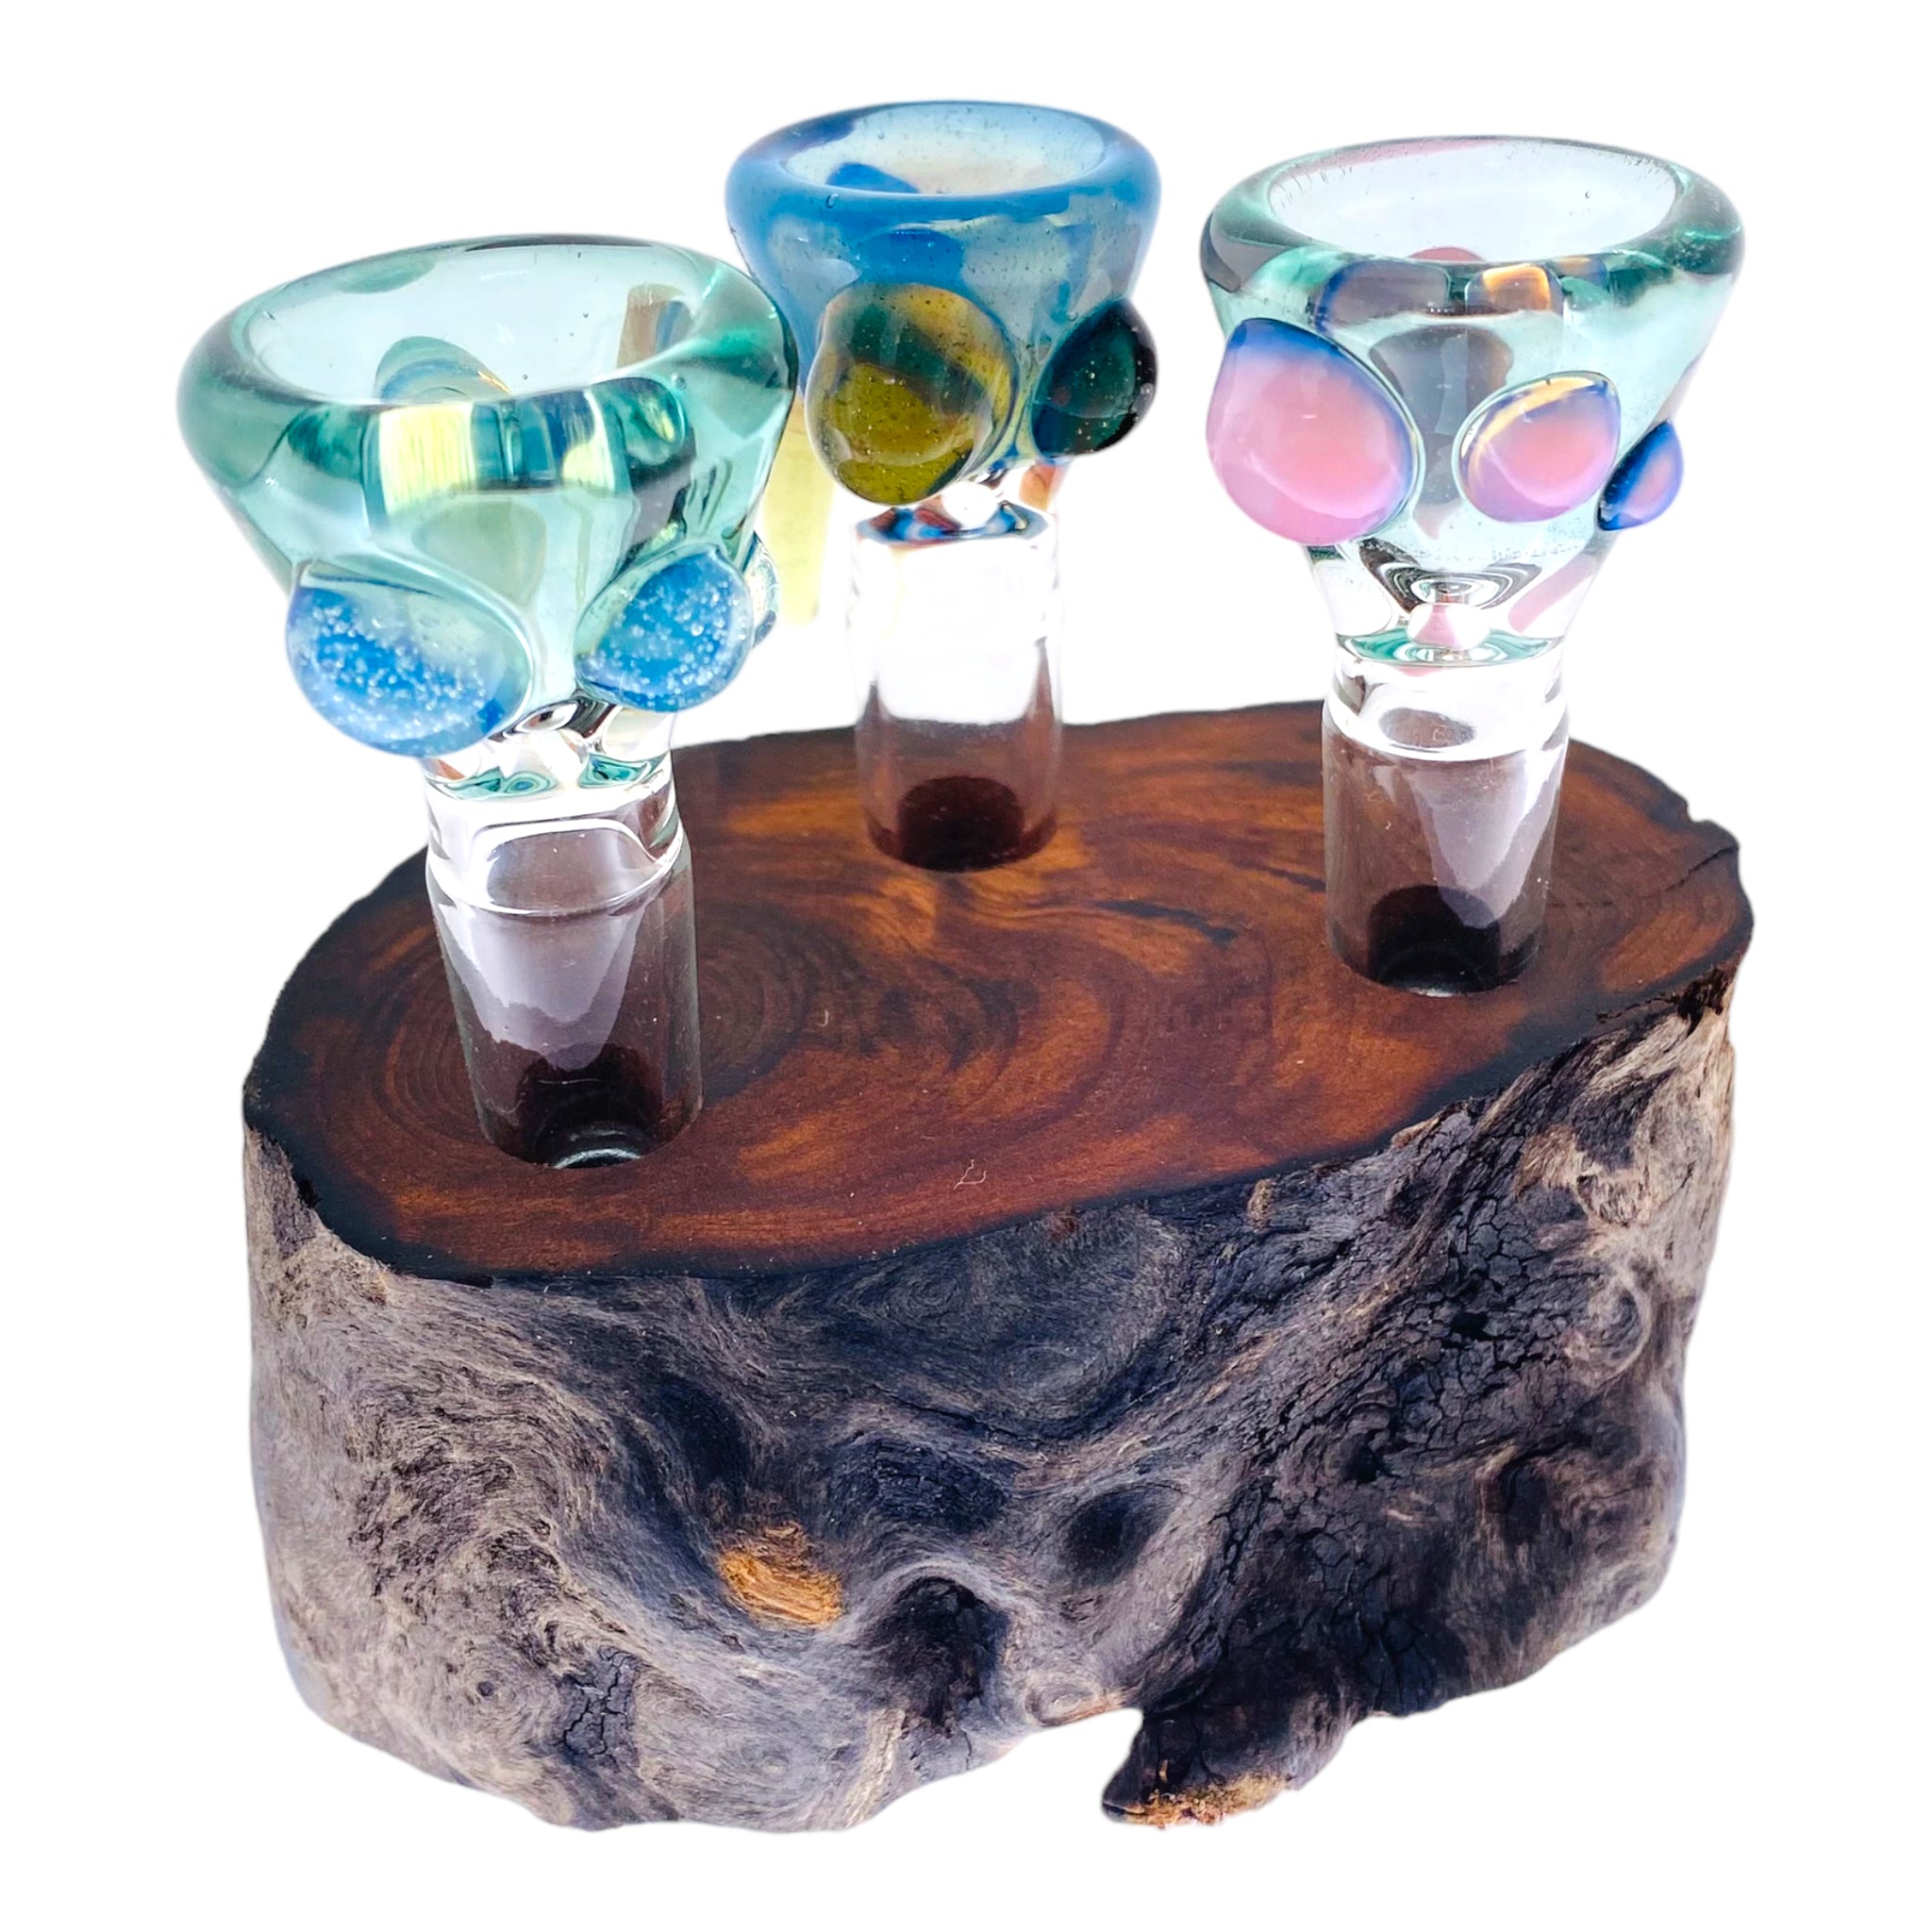 3 Hole Wood Display Stand Holder For 14mm Bong Bowl Pieces Or Quartz Bangers - Red Wood Burl With Live Edge #3